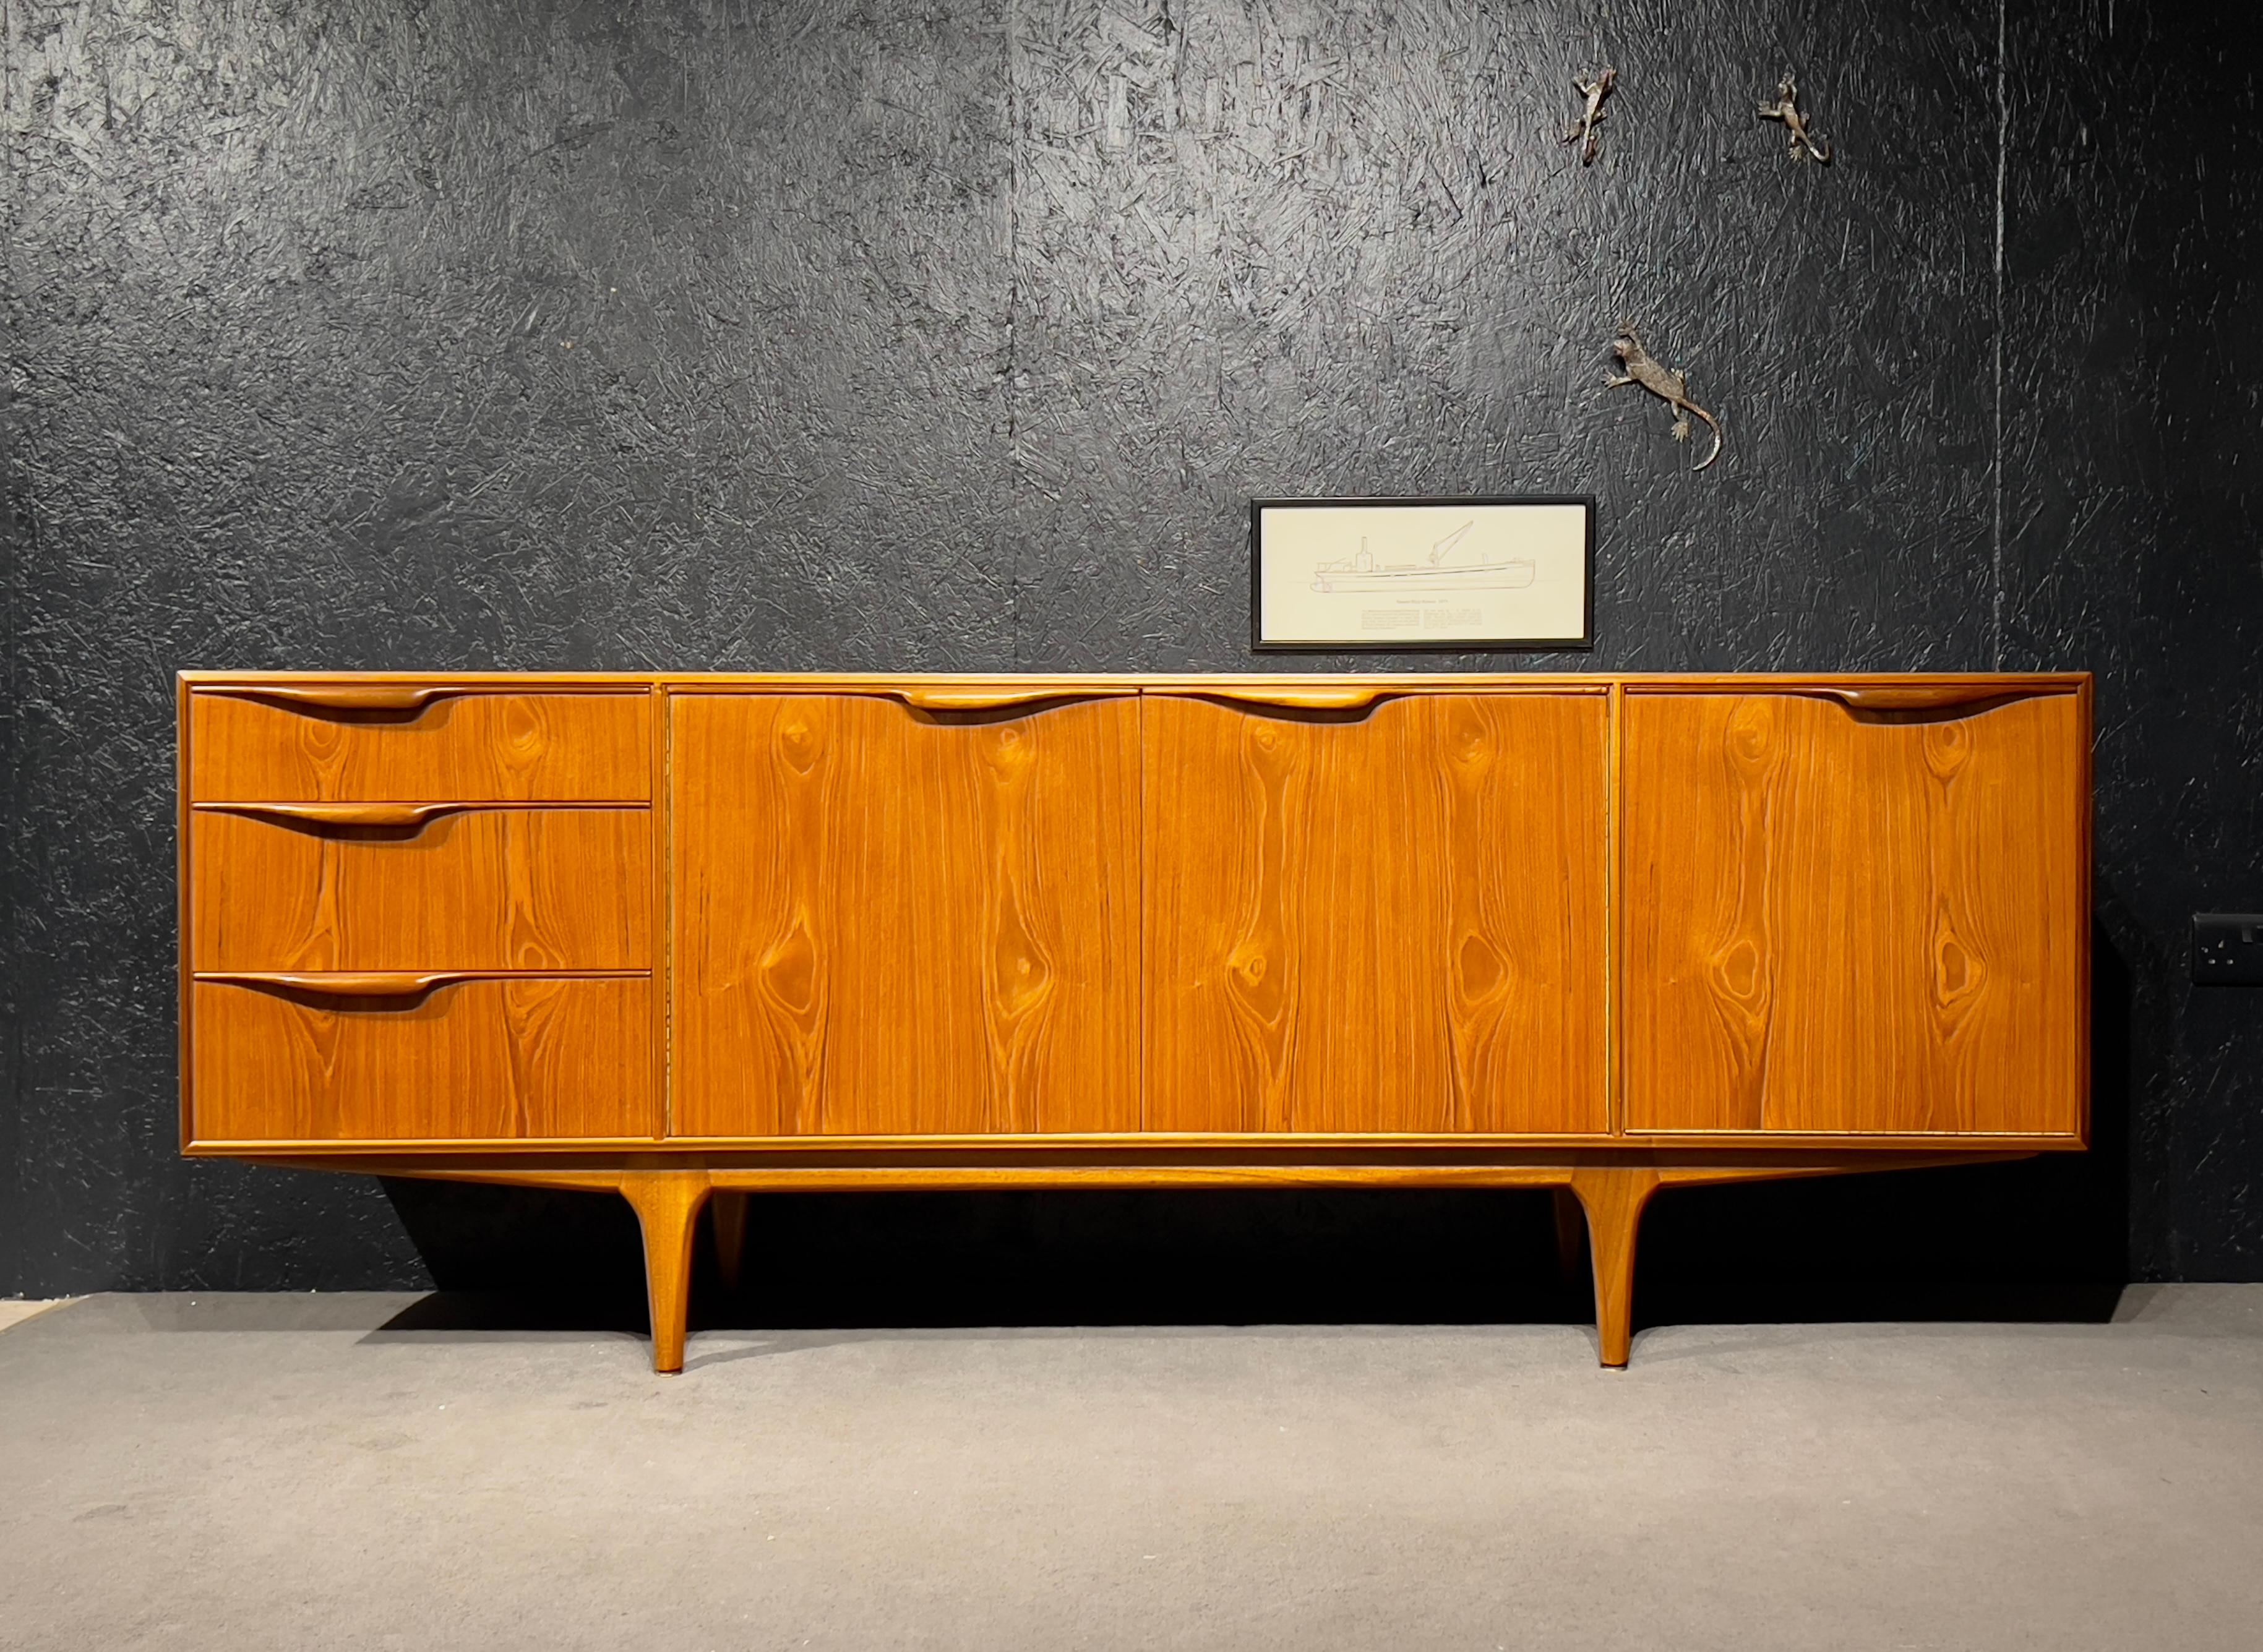 McIntosh sideboard was designed by Tom Robertson in Scotland for the Dunvegan collection, the most iconic collection of the designer.
The sideboard has a central two doors cupboard with a shaped tray to include taller items in our store, another